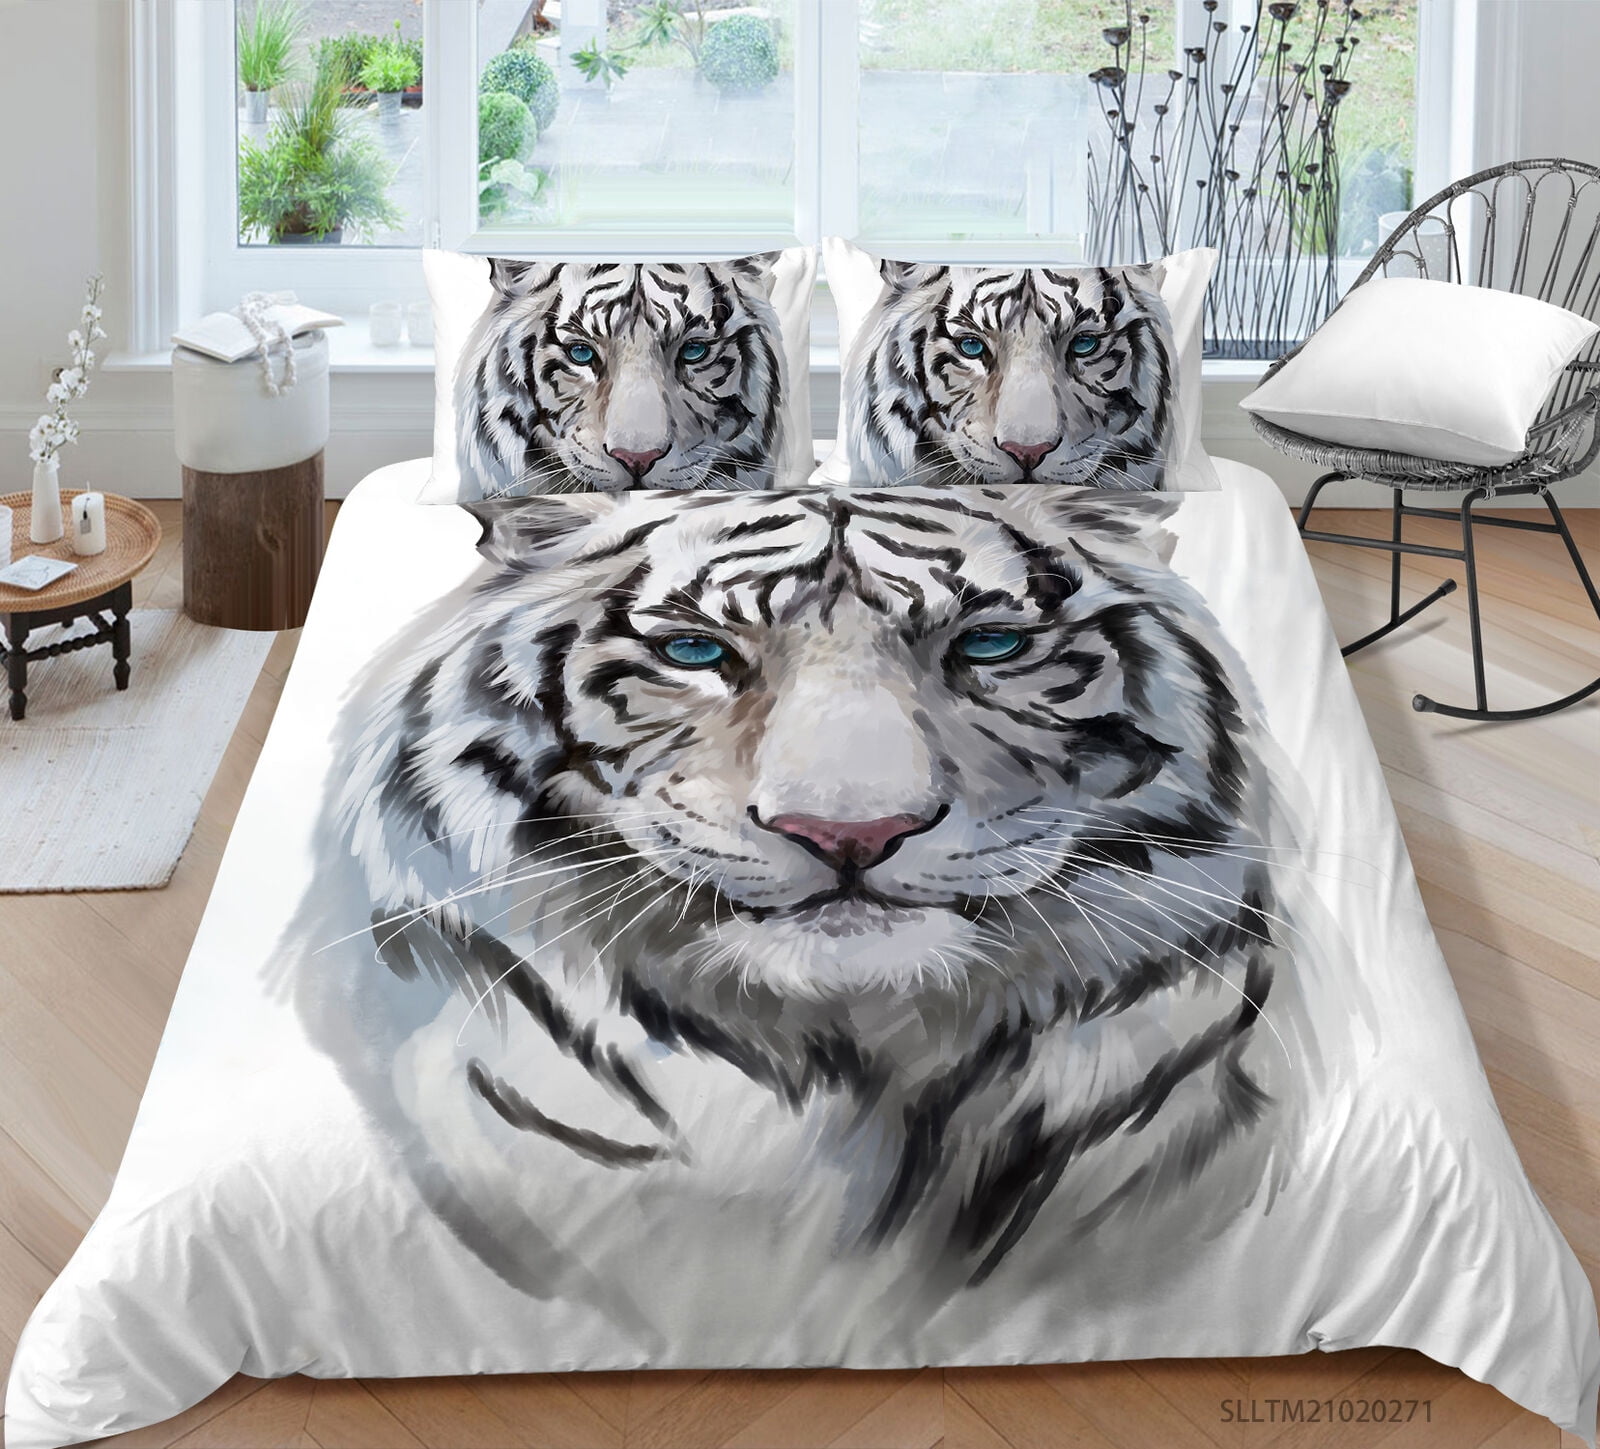 Om toevlucht te zoeken Volg ons waarde Bedding Cover Set 3D Tiger Printed Home Textiles White Duvet Cover Set High  Quality Home Bed Clothes,Queen (90"x90") - Walmart.com